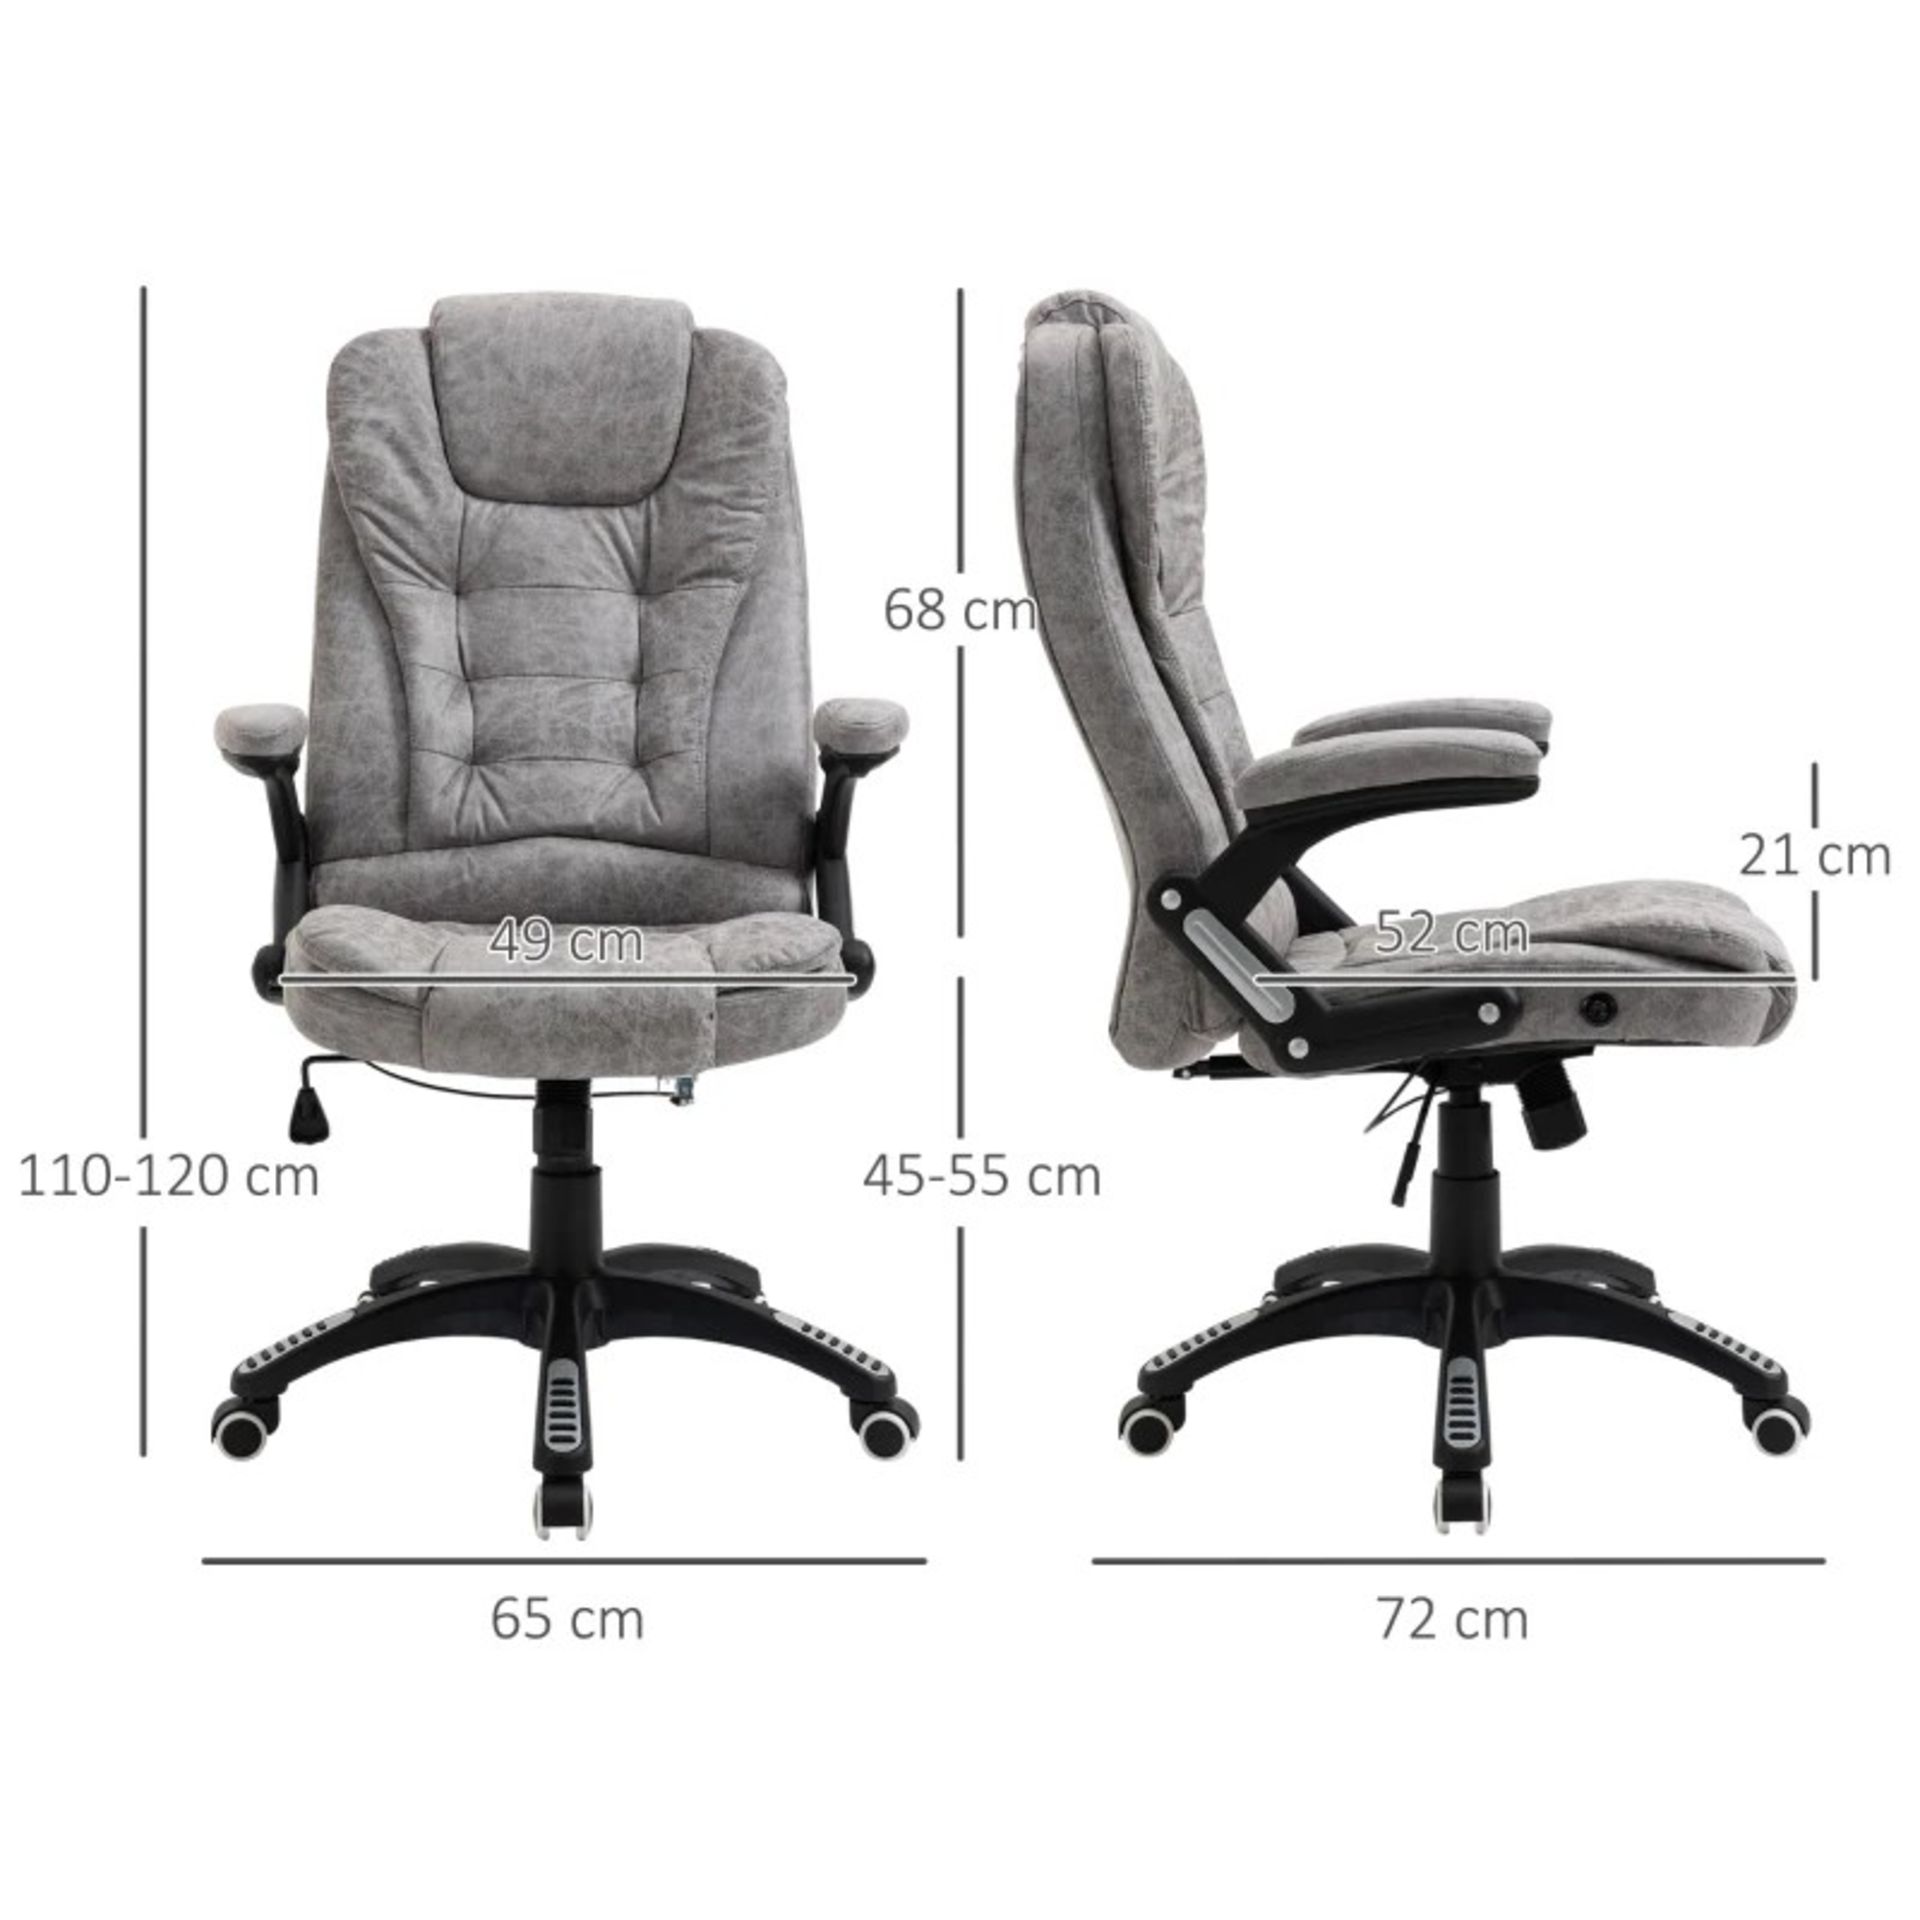 RRP £156.99 - Vinsetto High Back Home Office Chair Computer Desk Chair w/ Arm, Swivel Wheels, Grey - Image 2 of 4